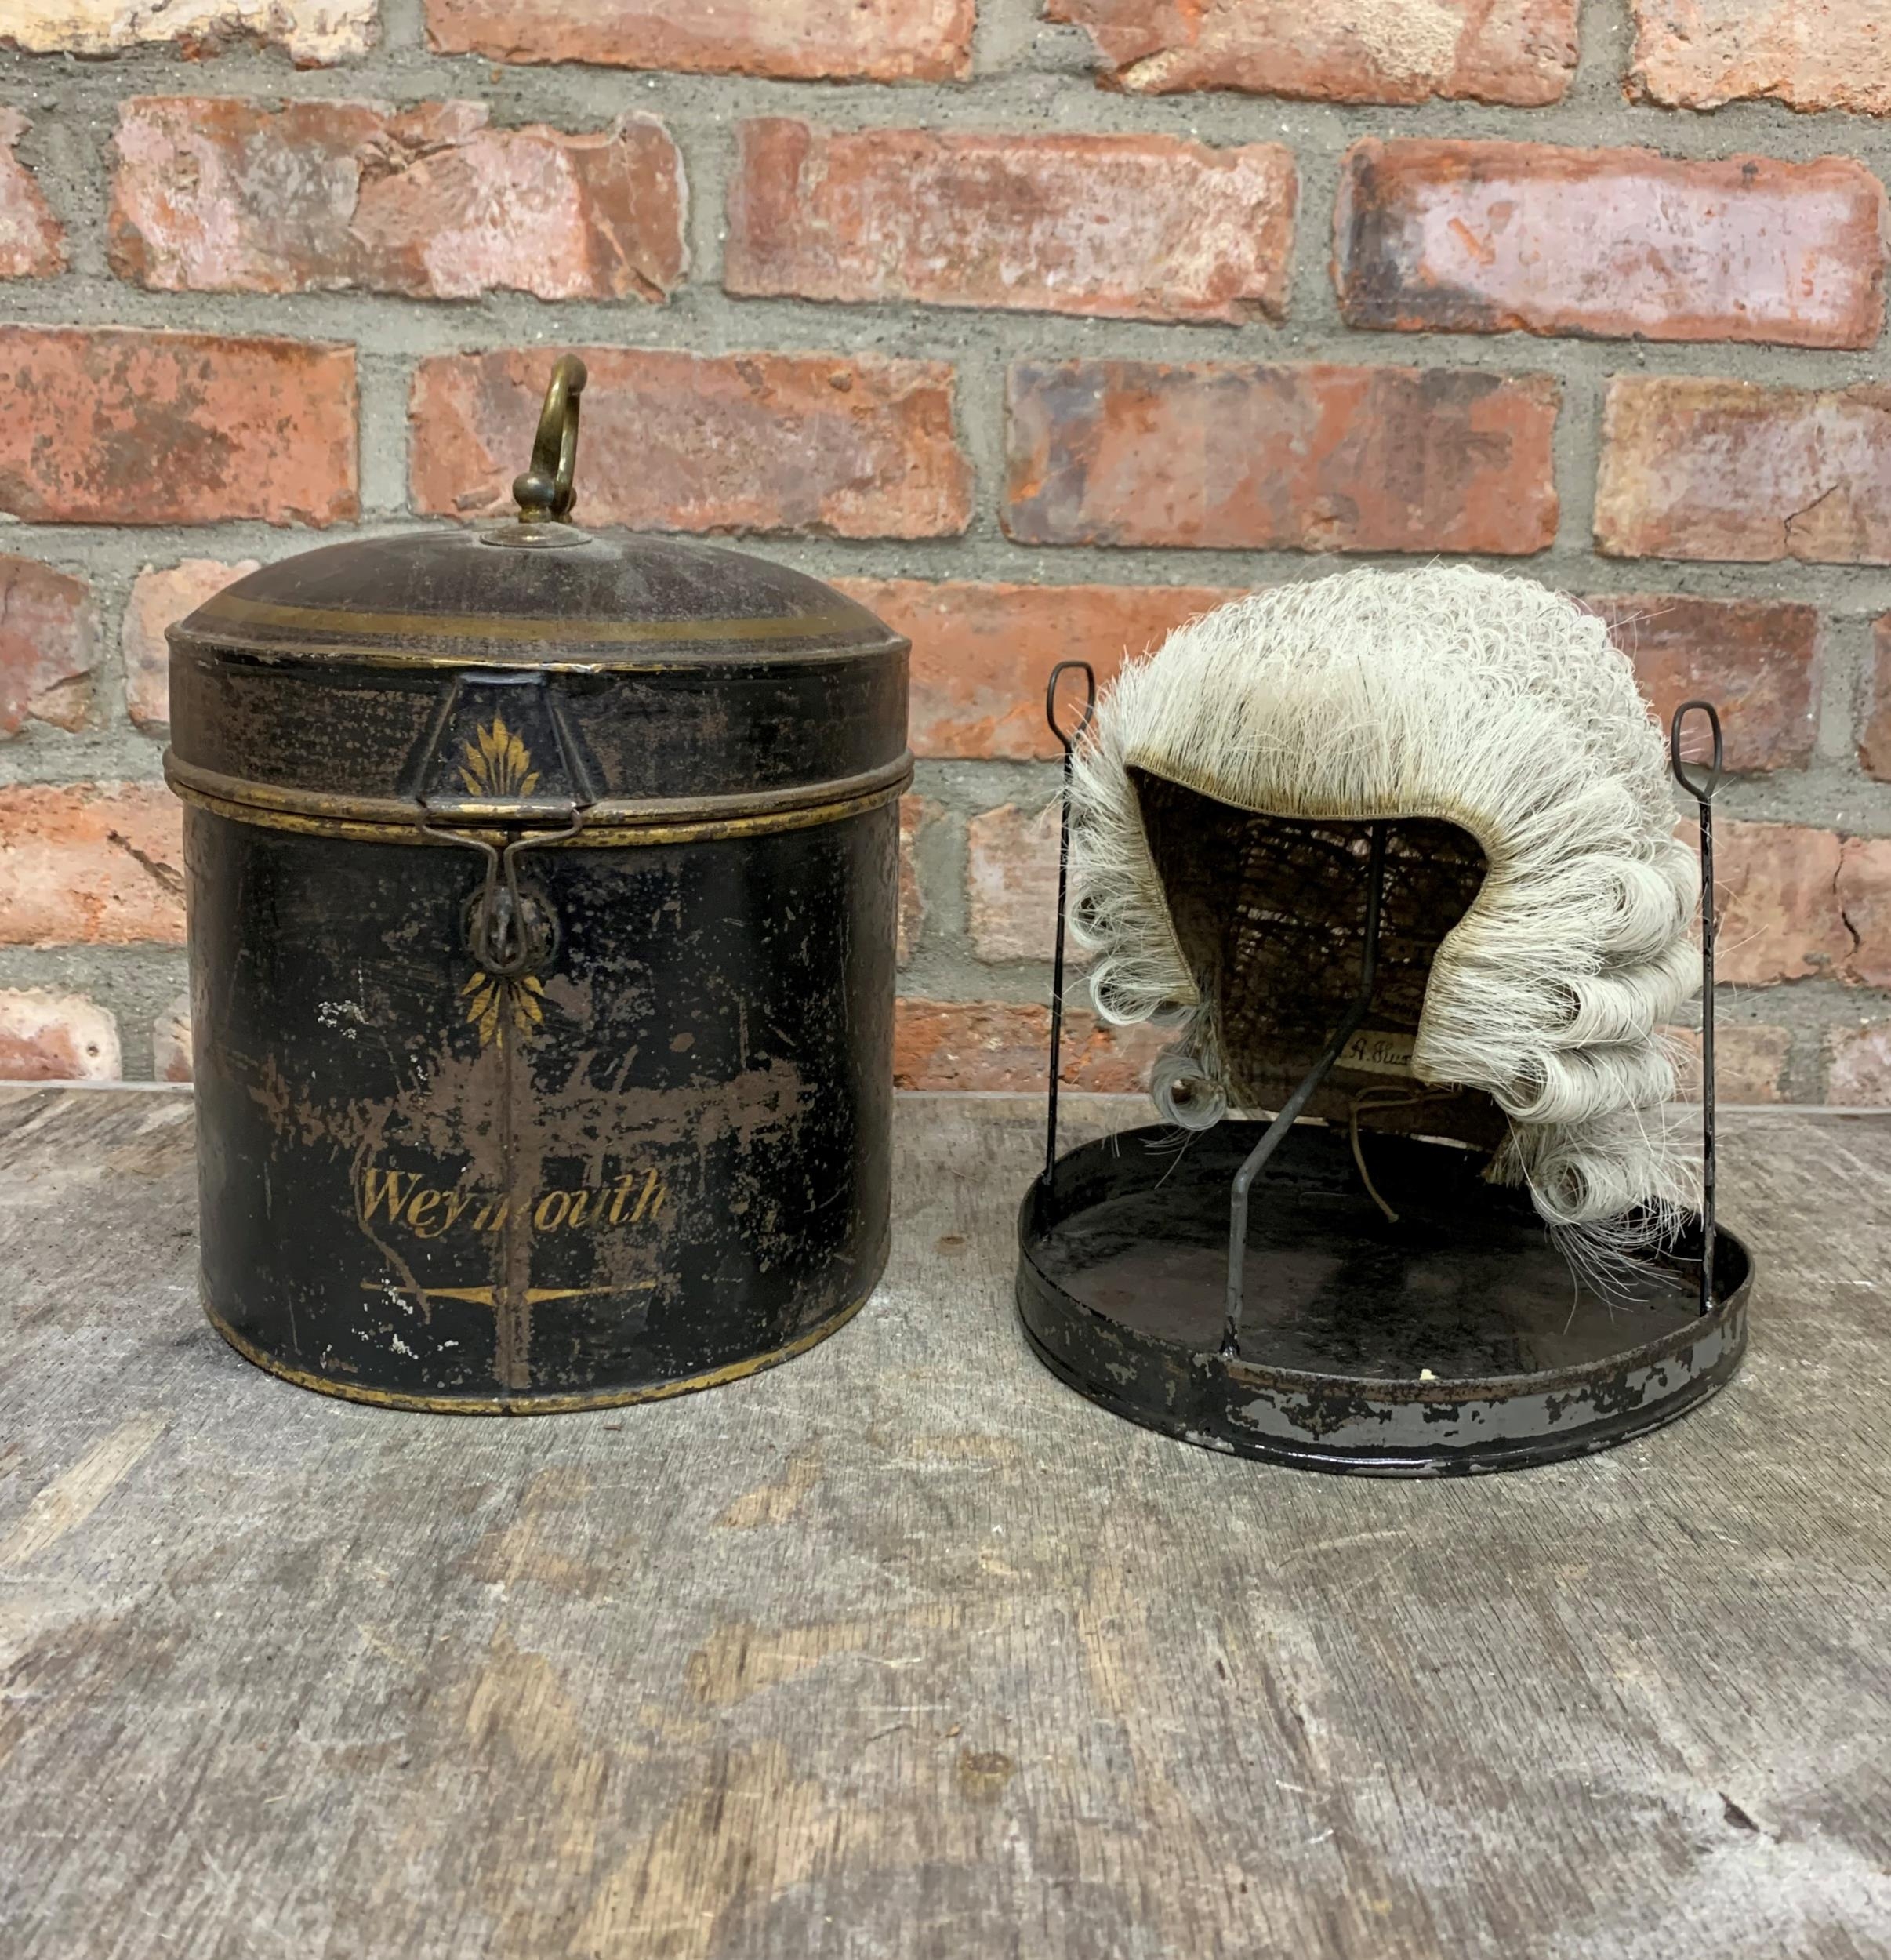 Victorian Ravenscroft horse hair barrister wig in original "Weymouth" tin, the tin includes its